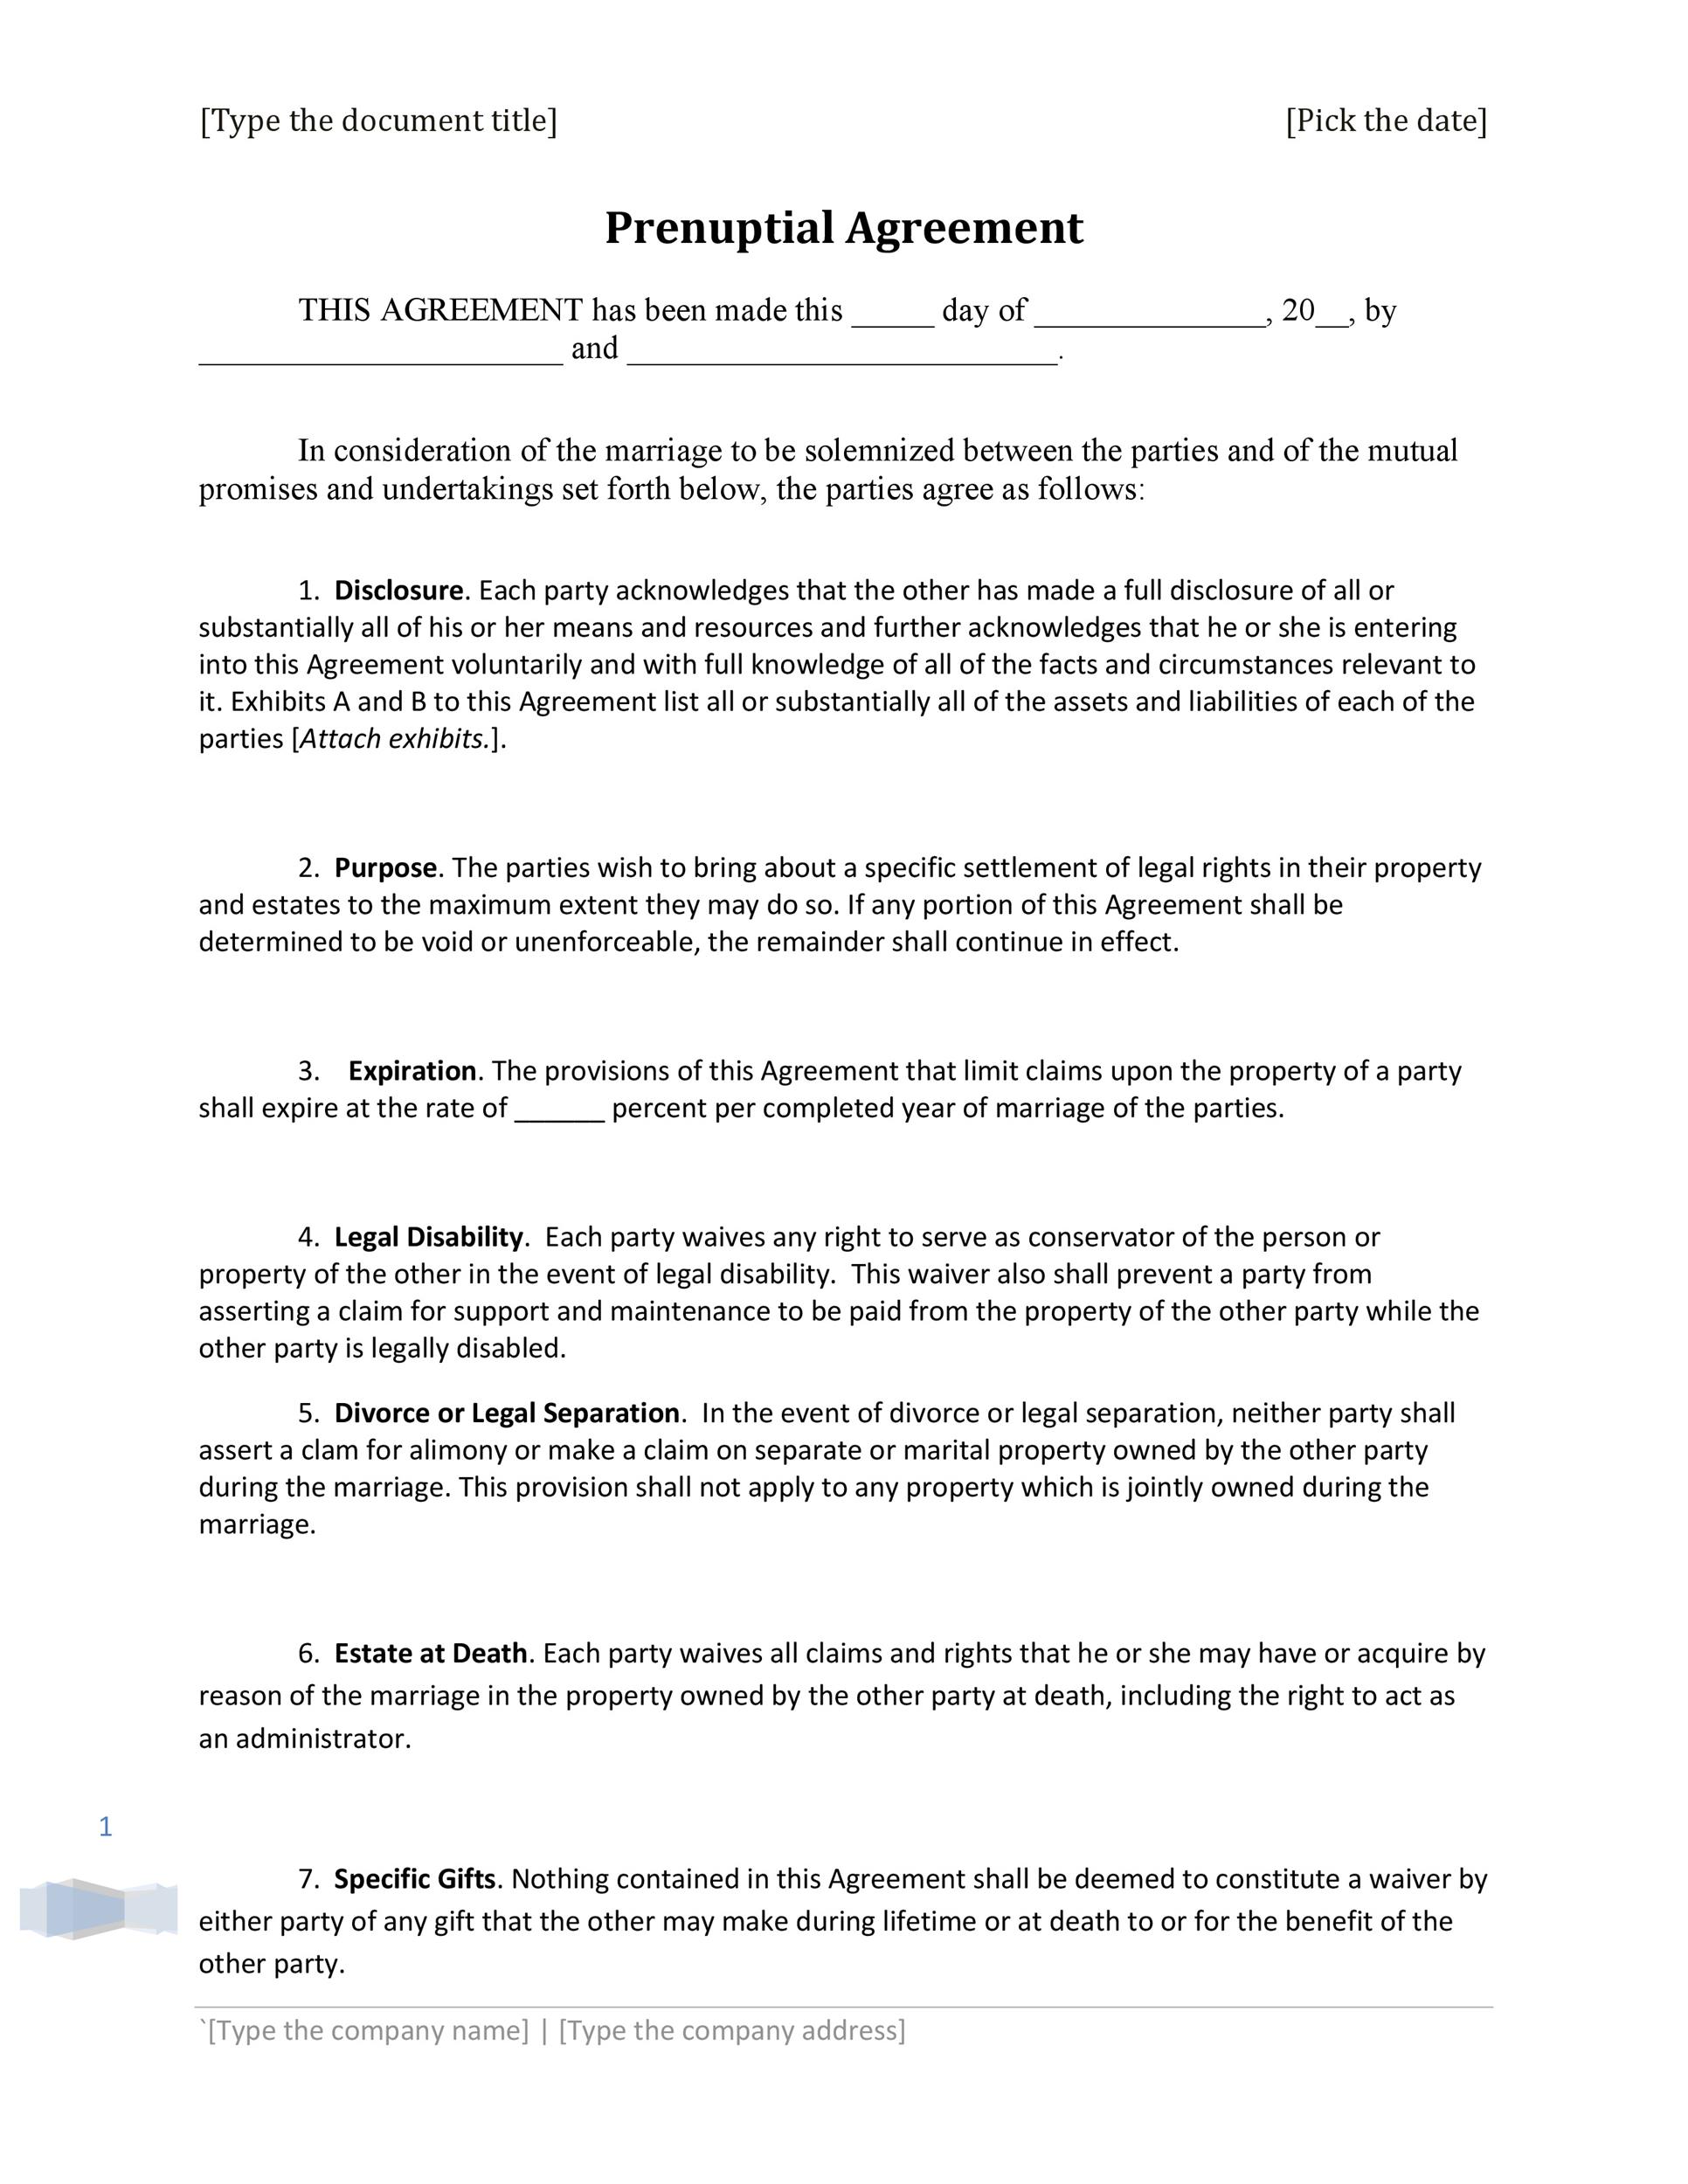 30+ Prenuptial Agreement Samples & Forms ᐅ Template Lab